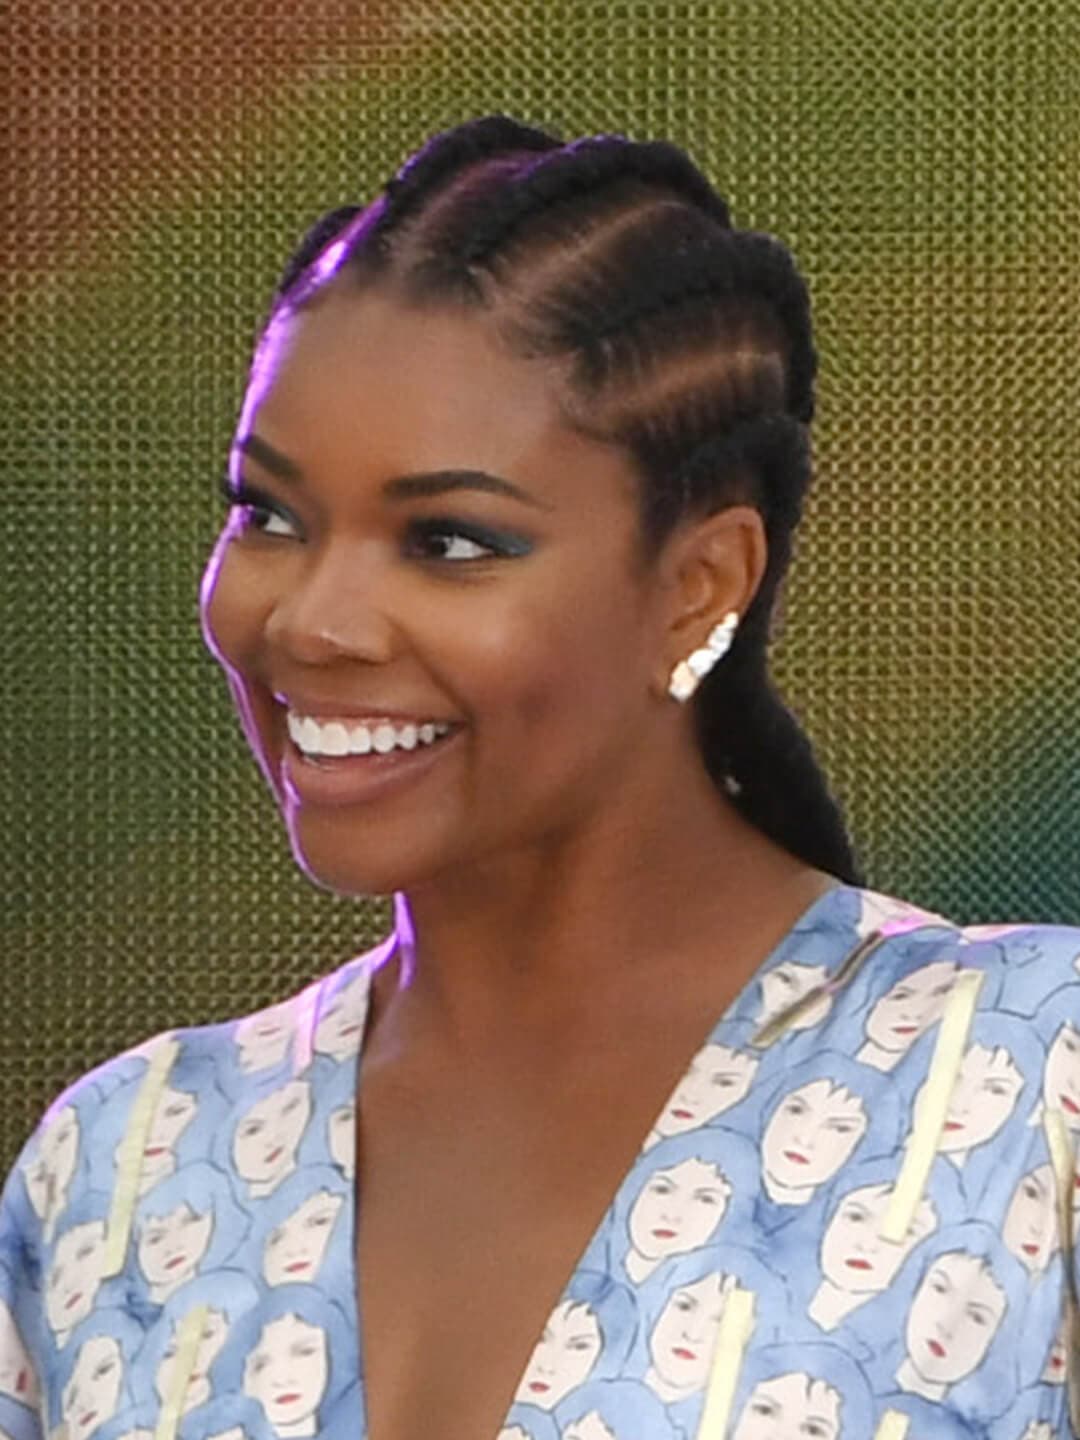 Smiling Gabrielle Union rocking a braided pony tail hairstyle and graphic pattern dress